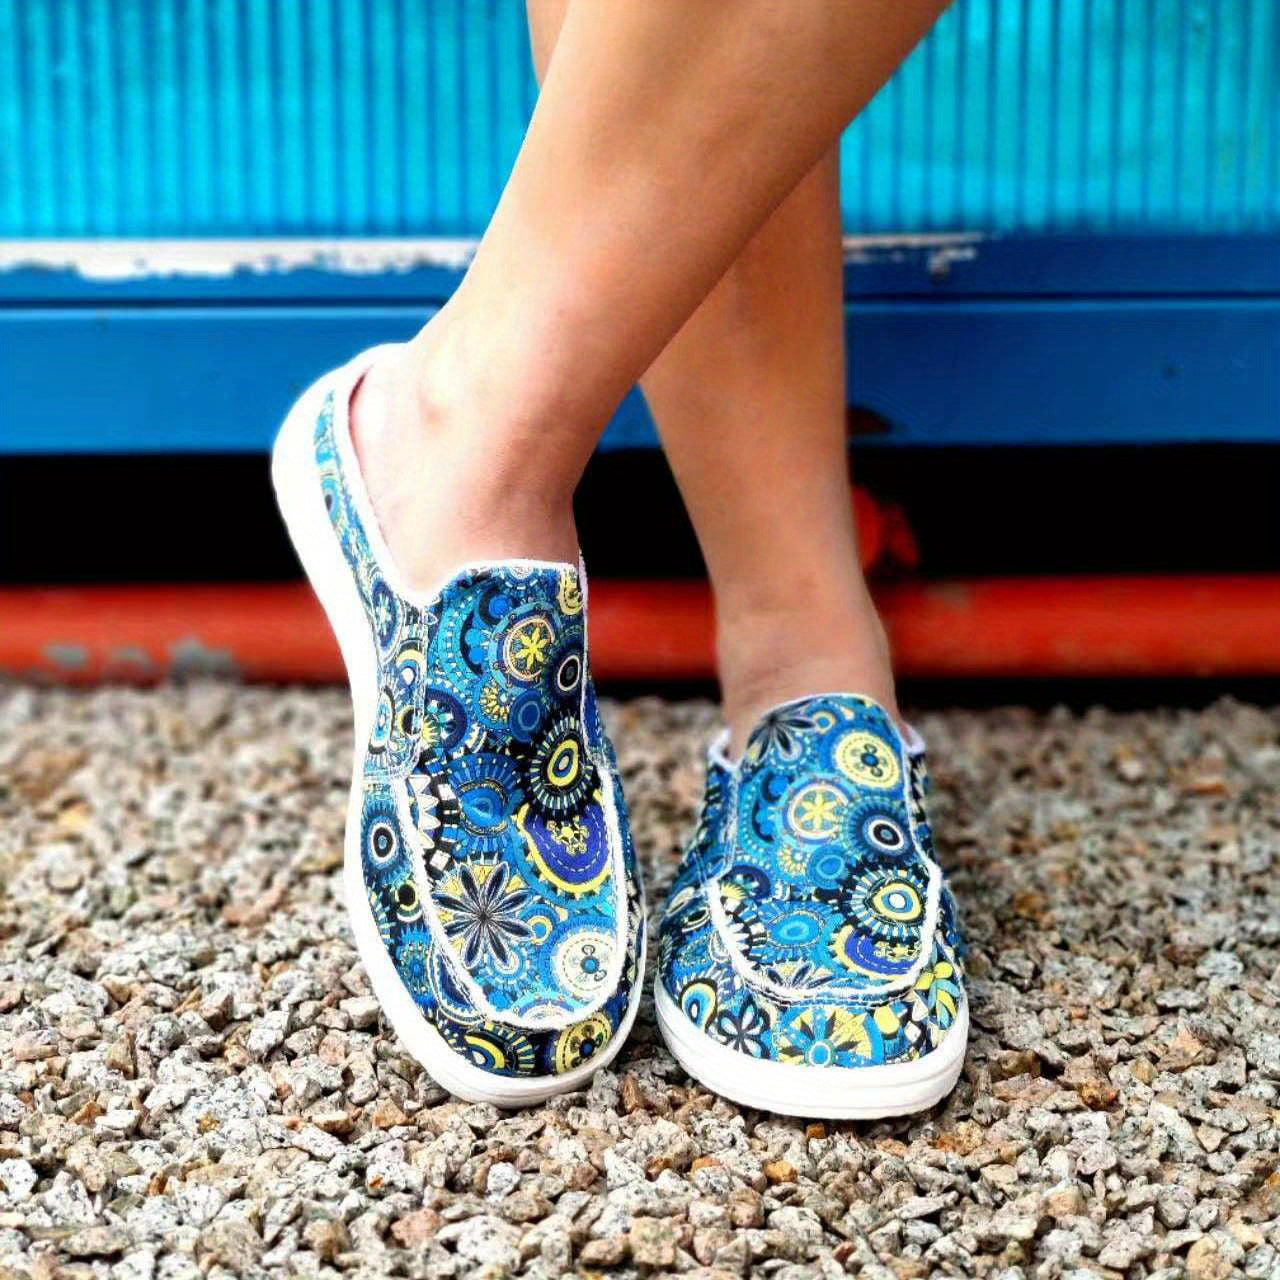 Women's Floral Print Canvas Shoes, Slip-on Round Toe Lightweight Casual Shoes, Women's Comfy Walking Flat Shoes